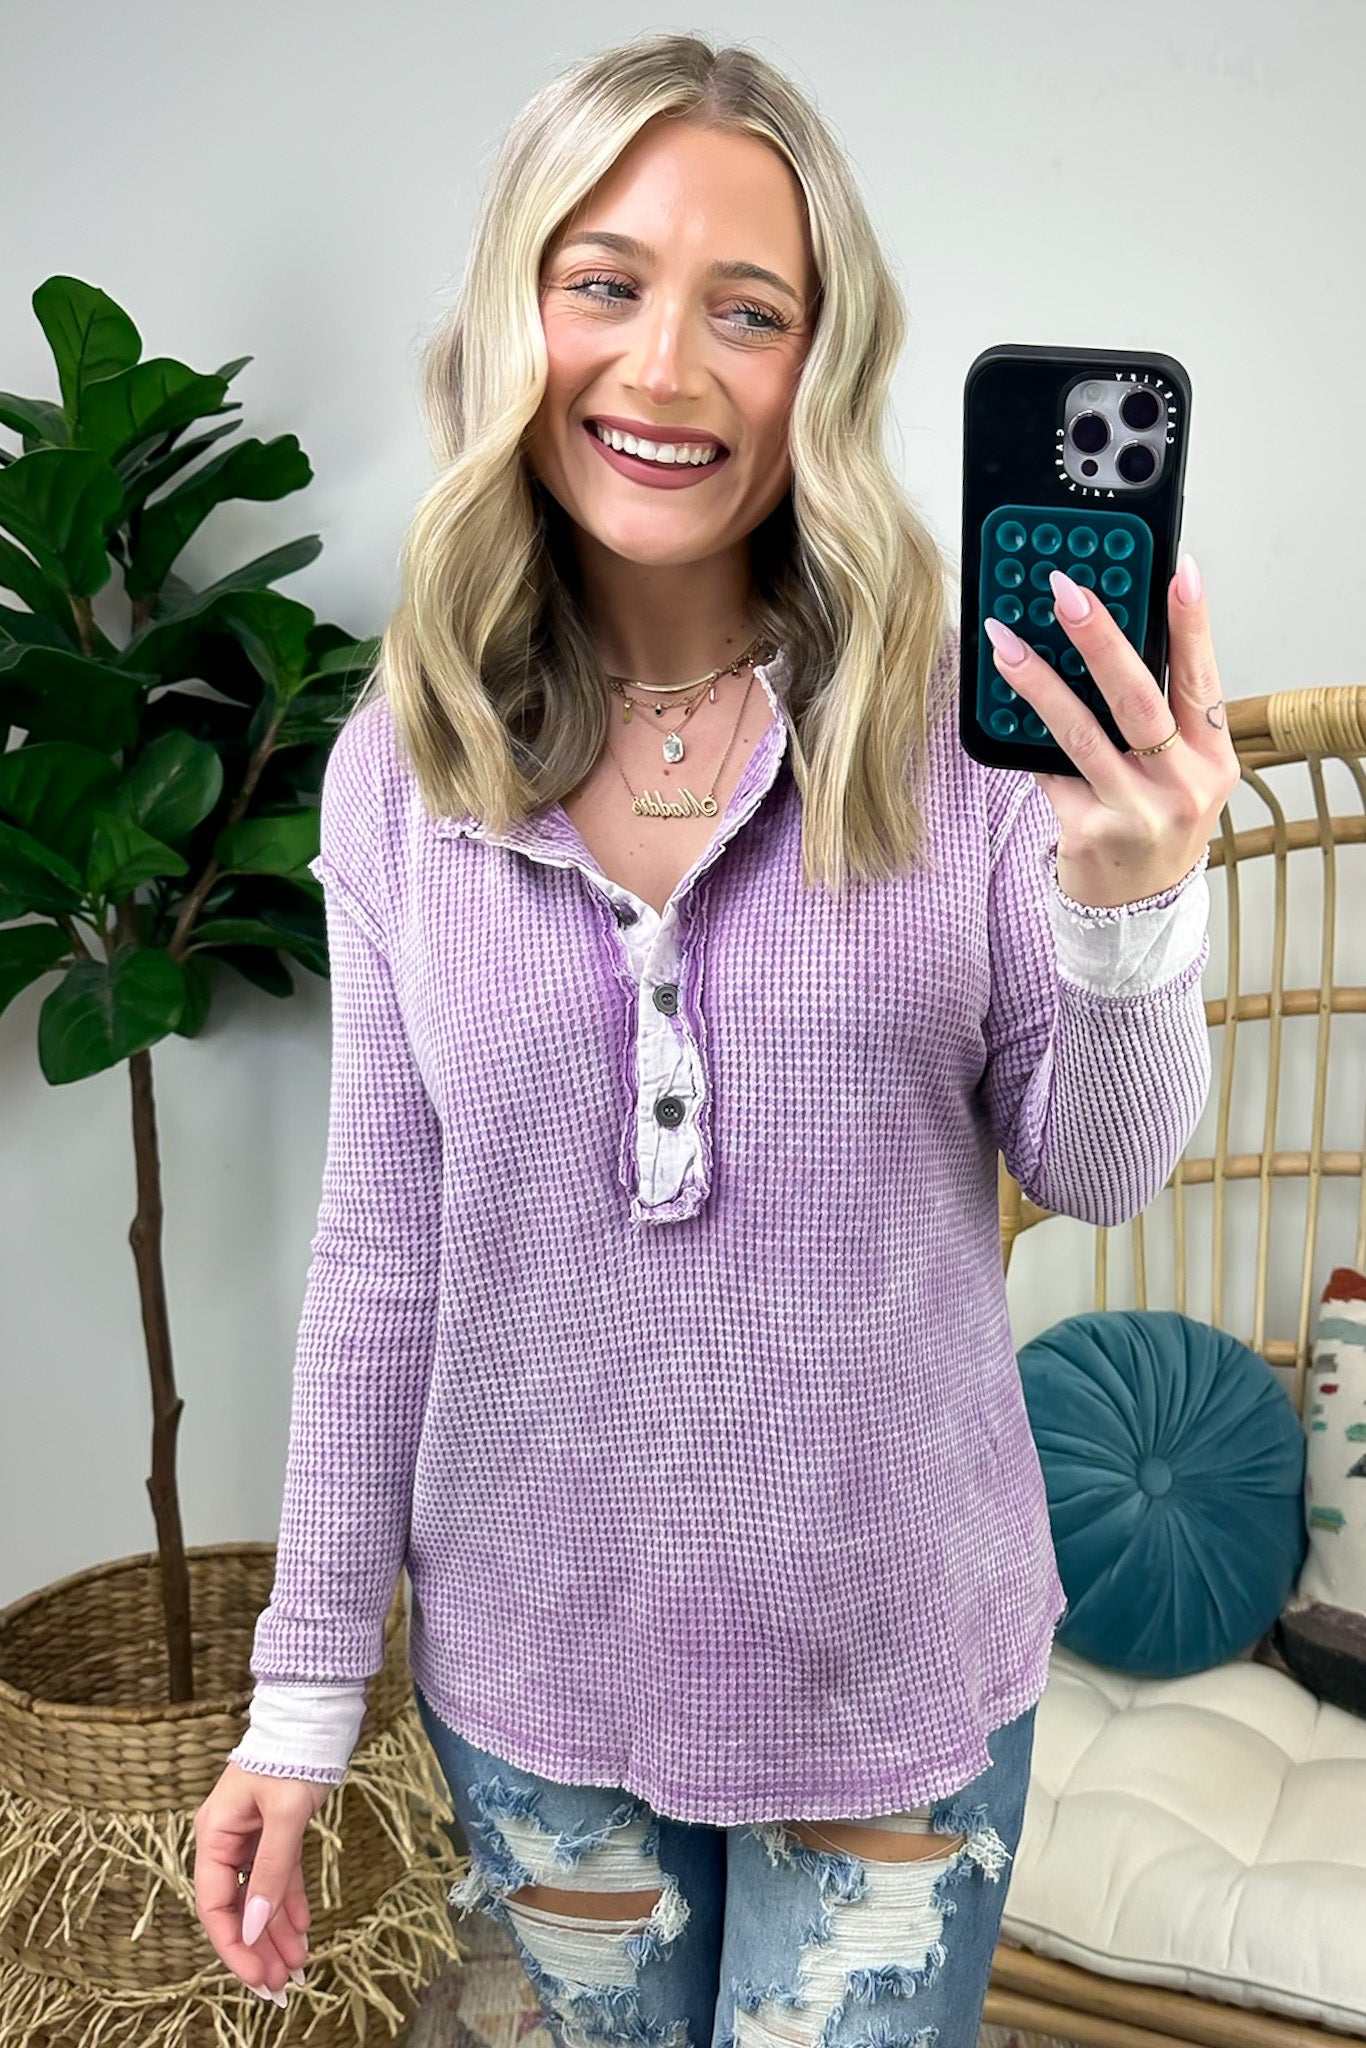 The Curated Closet - Lilac Waffle Knit Henley